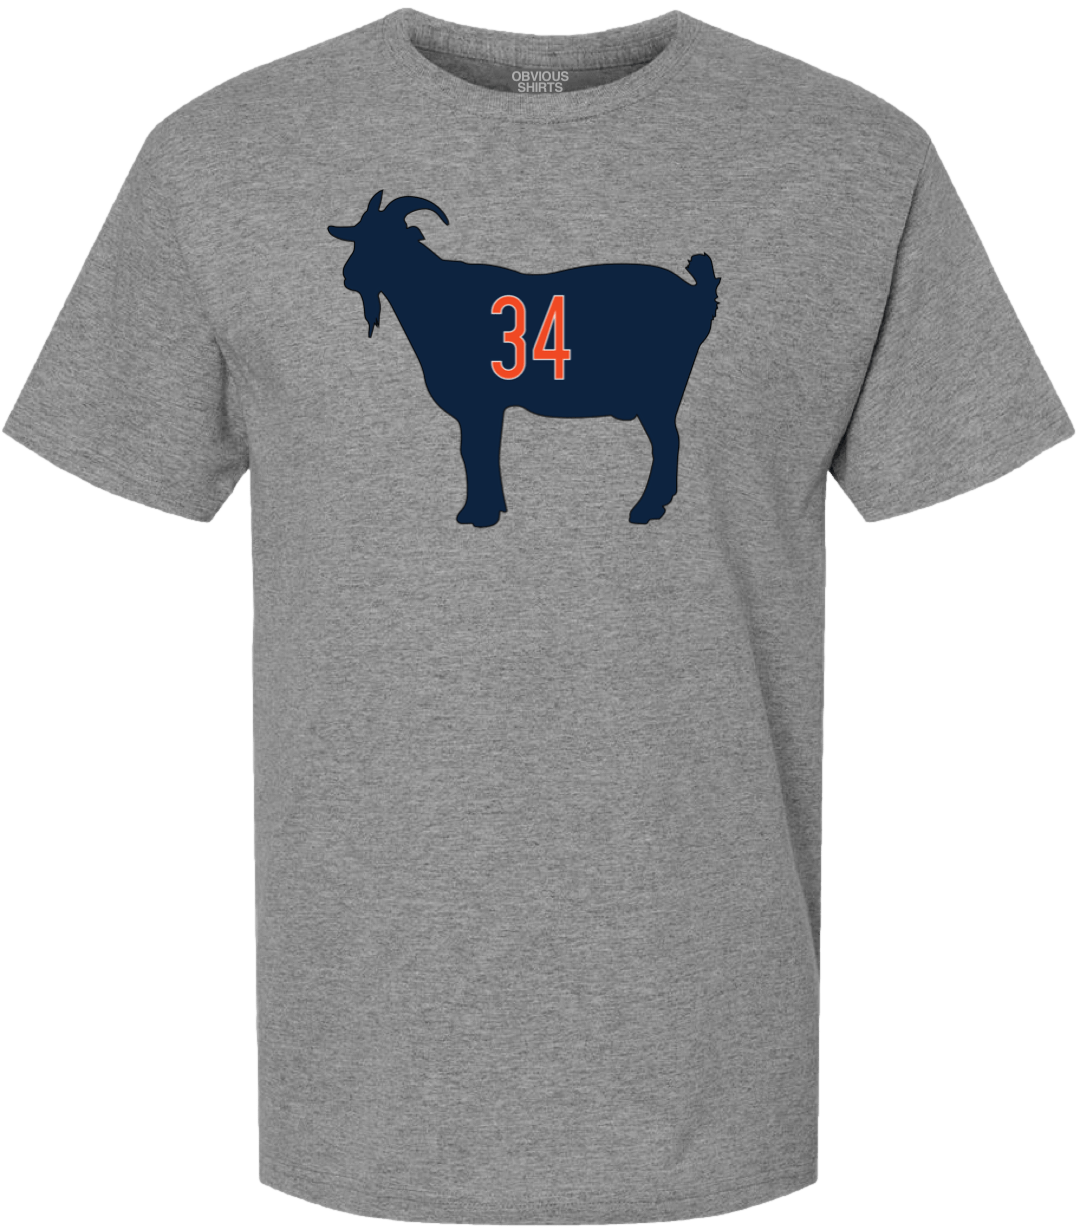 FOOTBALL'S GOAT. - OBVIOUS SHIRTS